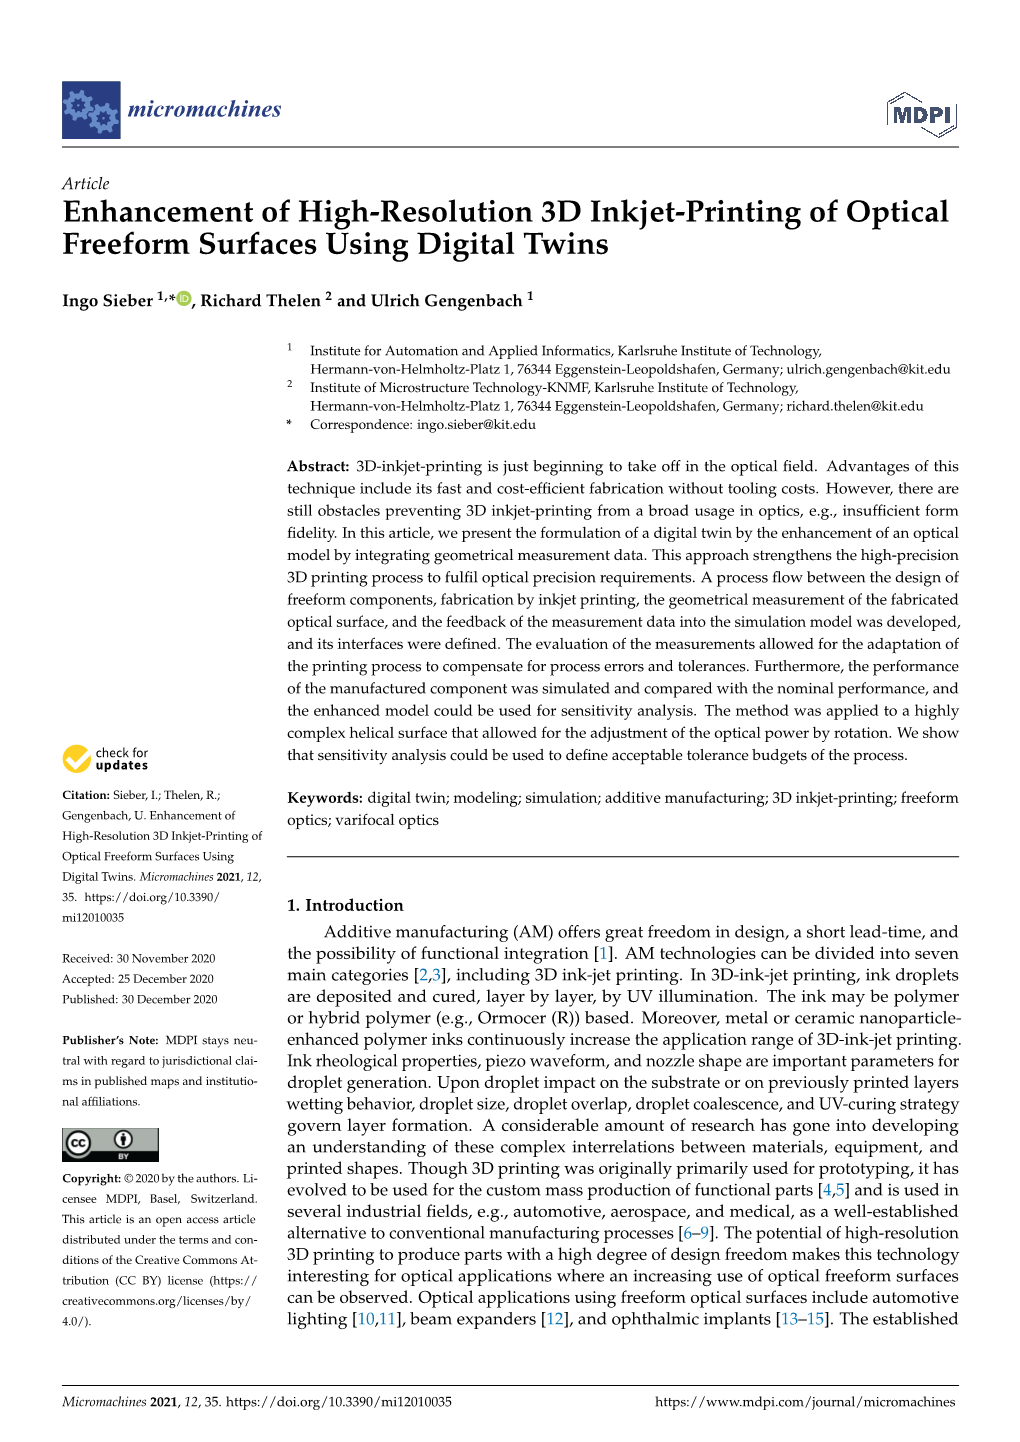 Enhancement of High-Resolution 3D Inkjet-Printing of Optical Freeform Surfaces Using Digital Twins